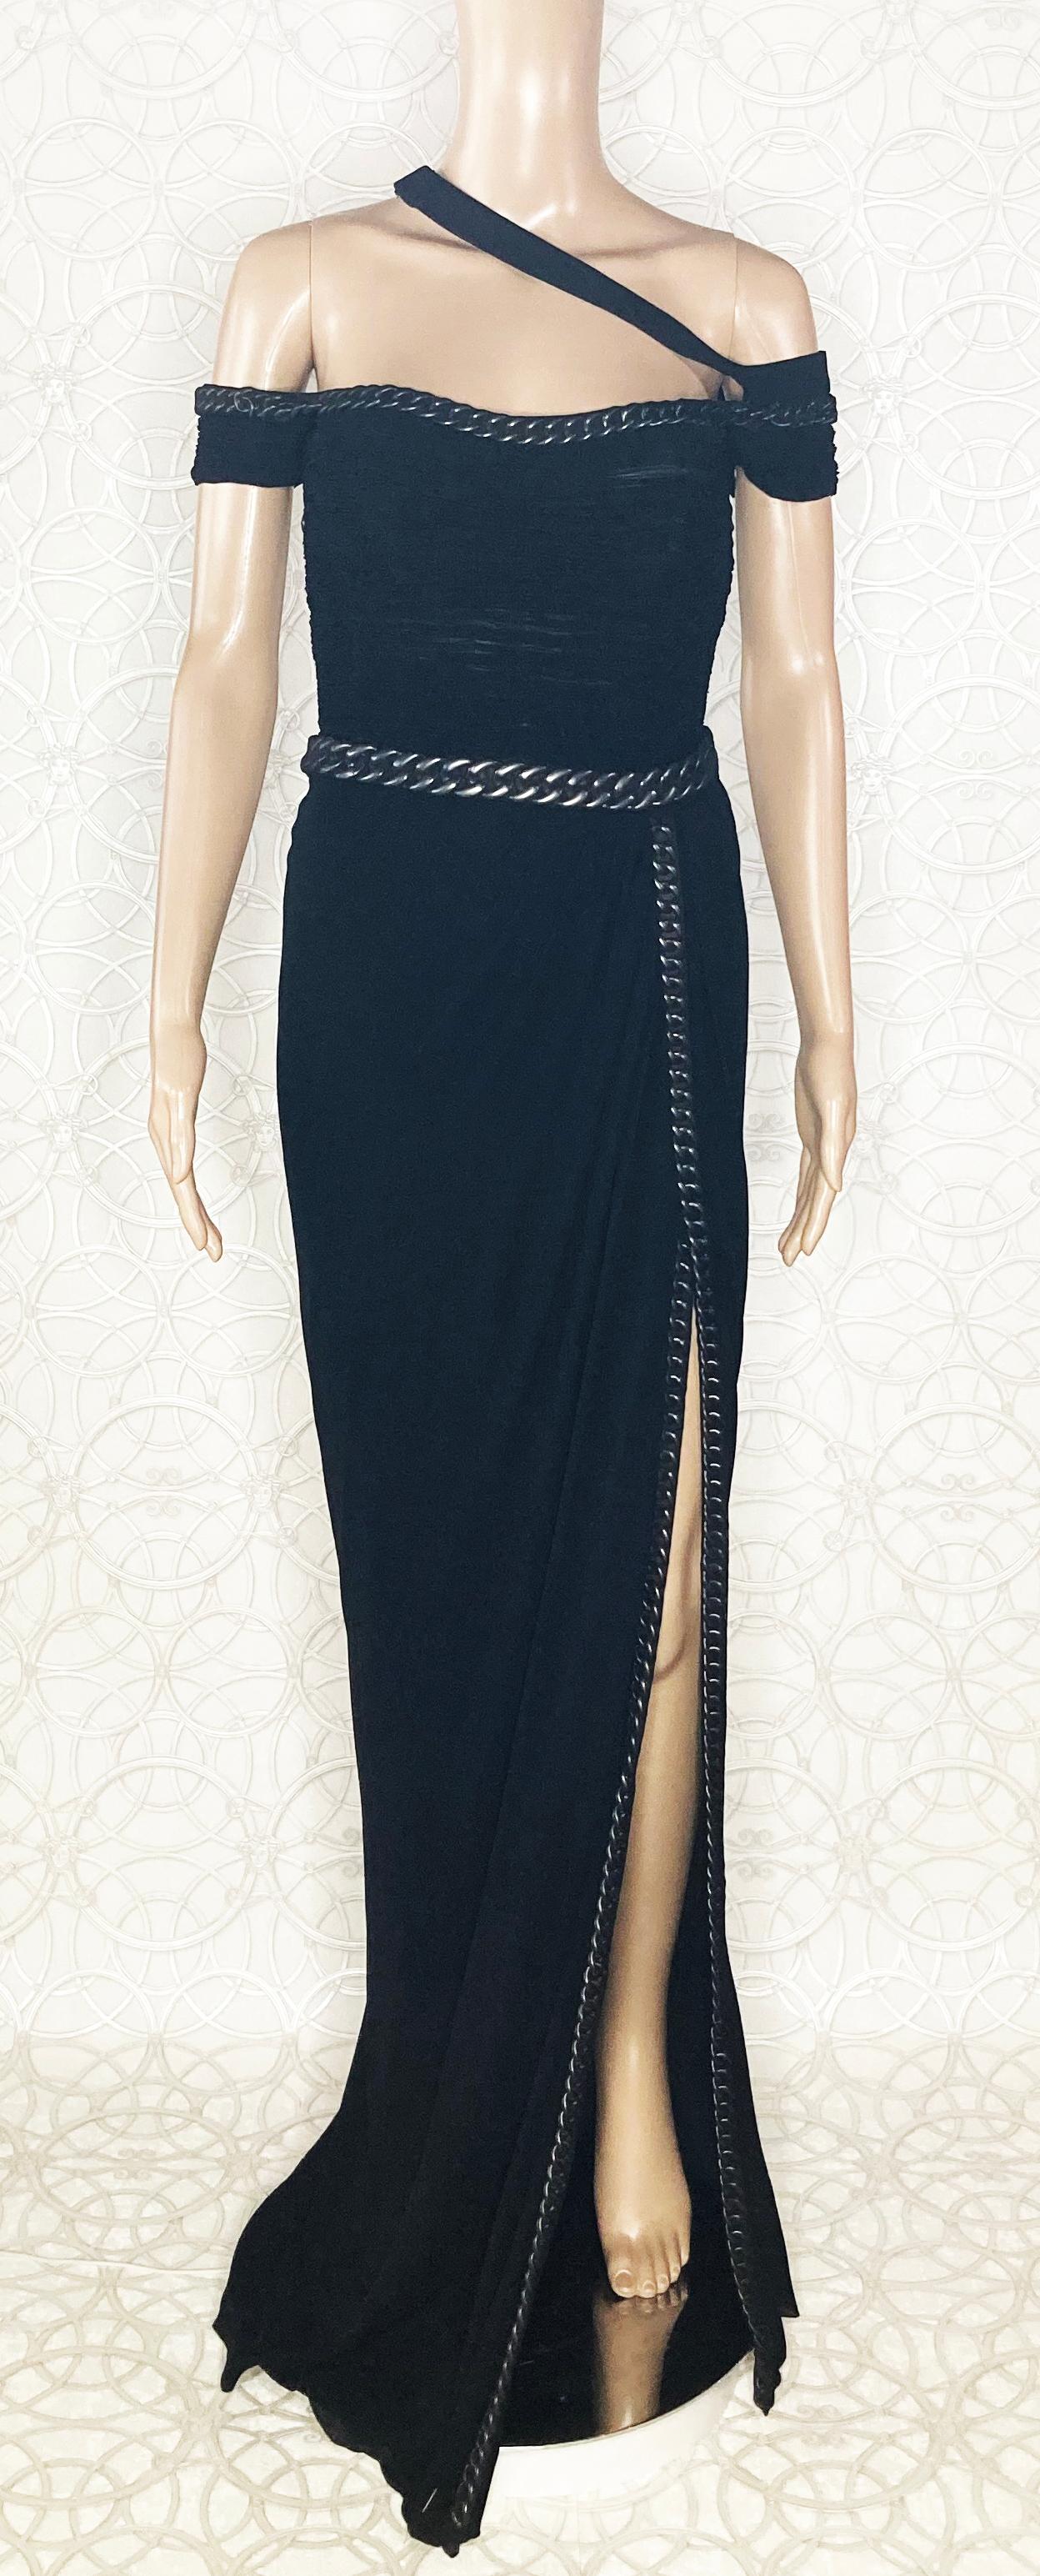 F/W 2007 Look #44 NEW VERSACE CHAIN EMBELLISHED LONG BLACK DRESS GOWN 40 - 4 For Sale 2